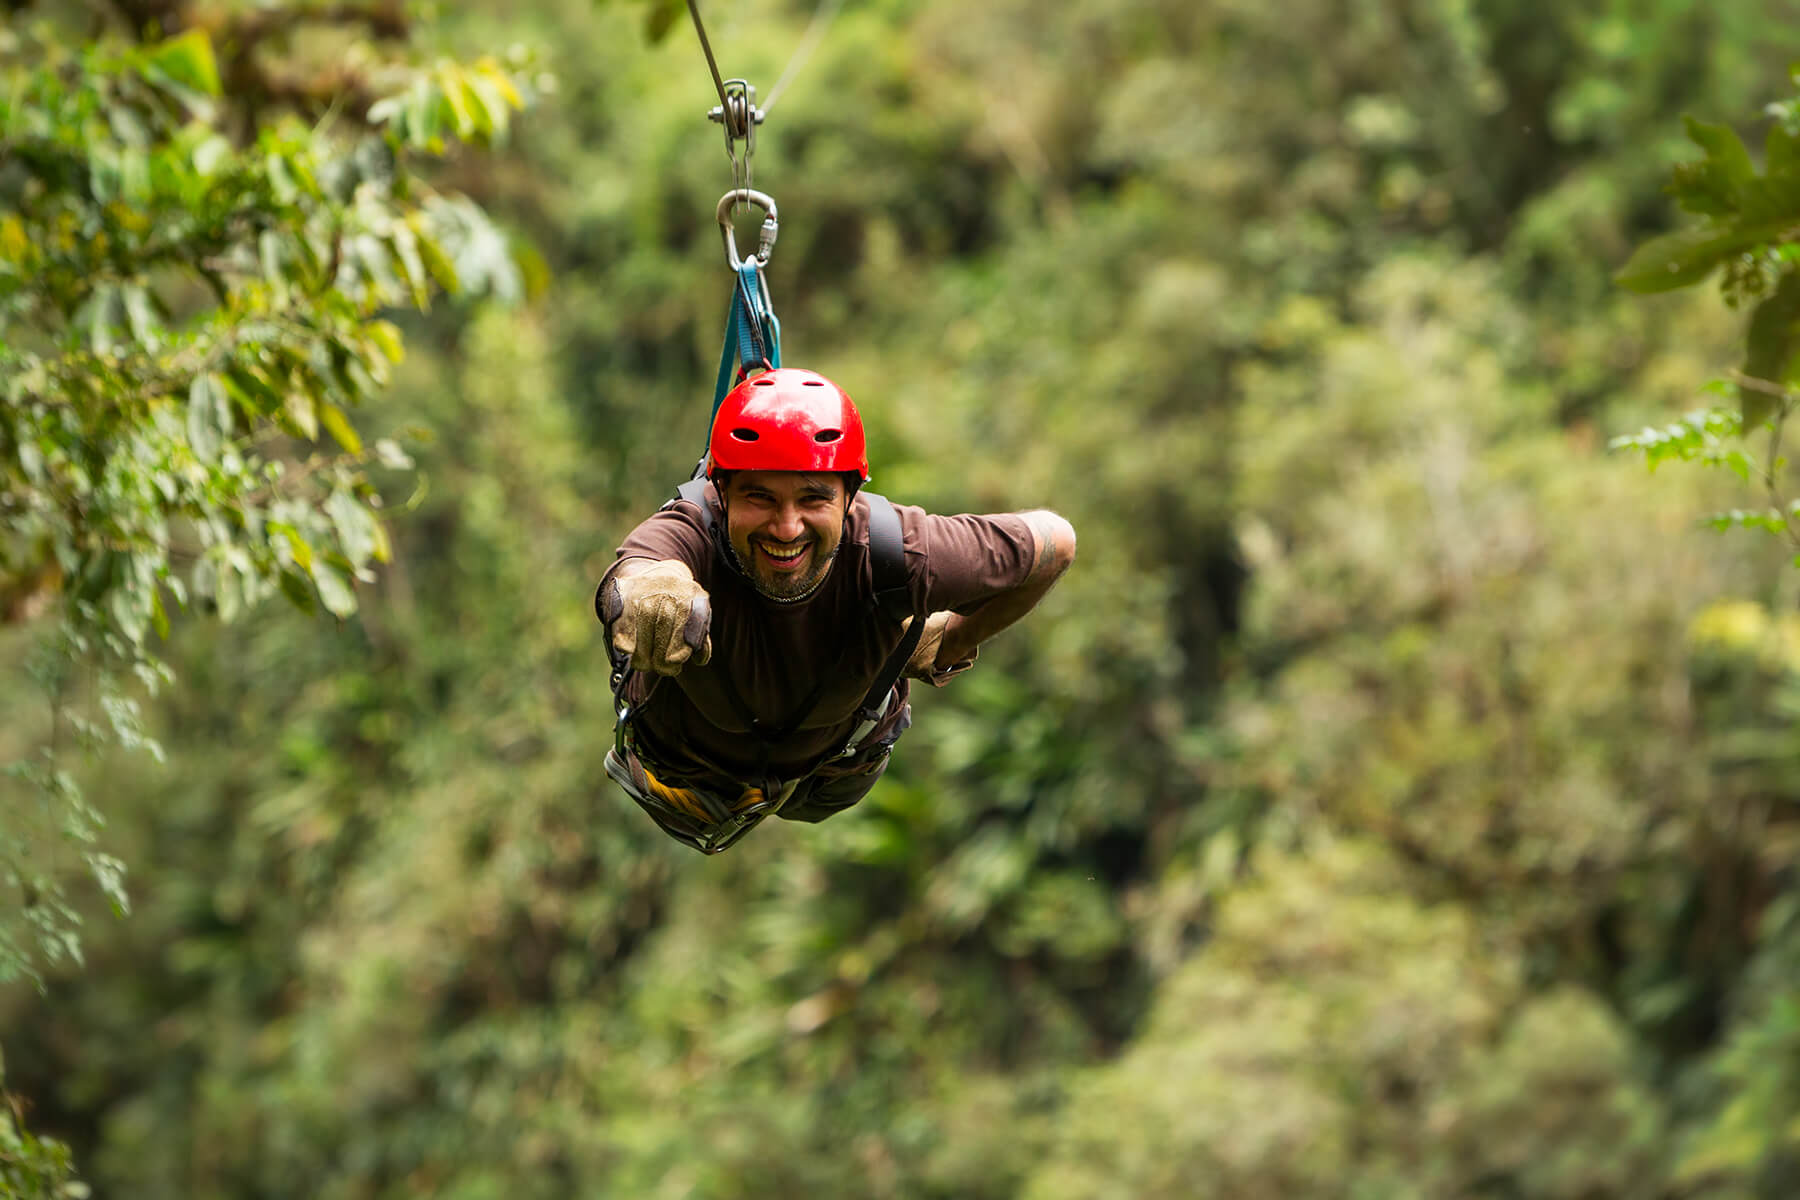 What Not to Wear When You’re Zip Lining